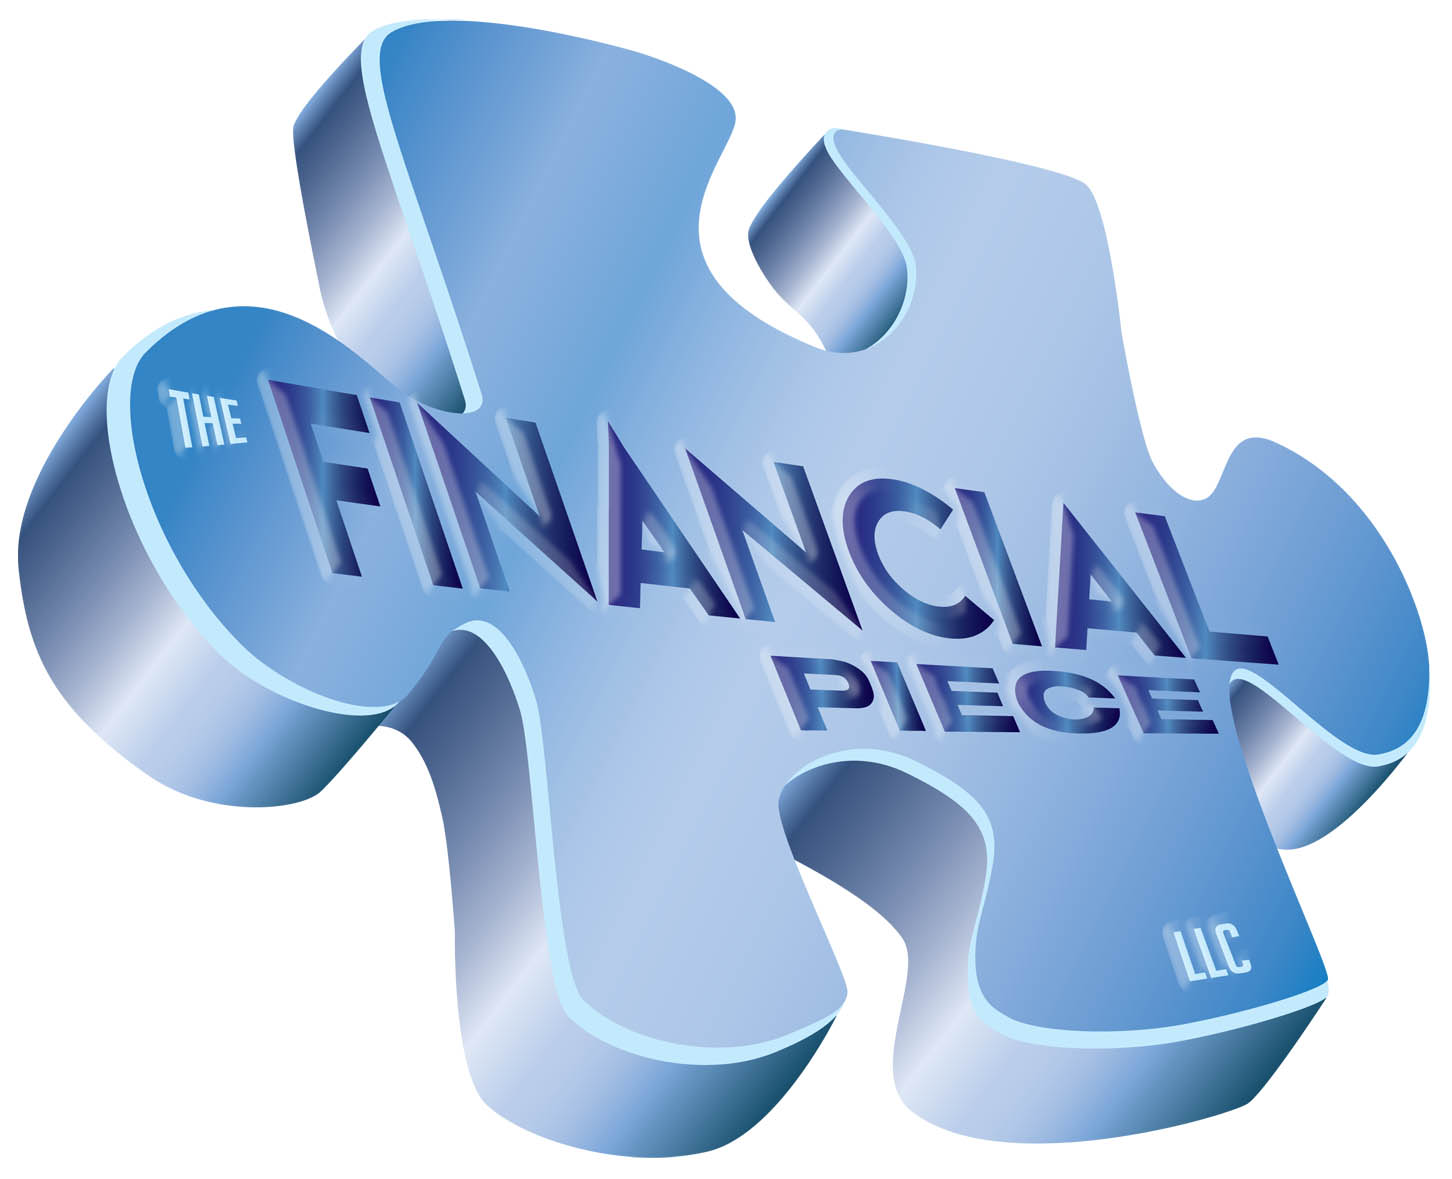 THE FINANCIAL PIECE